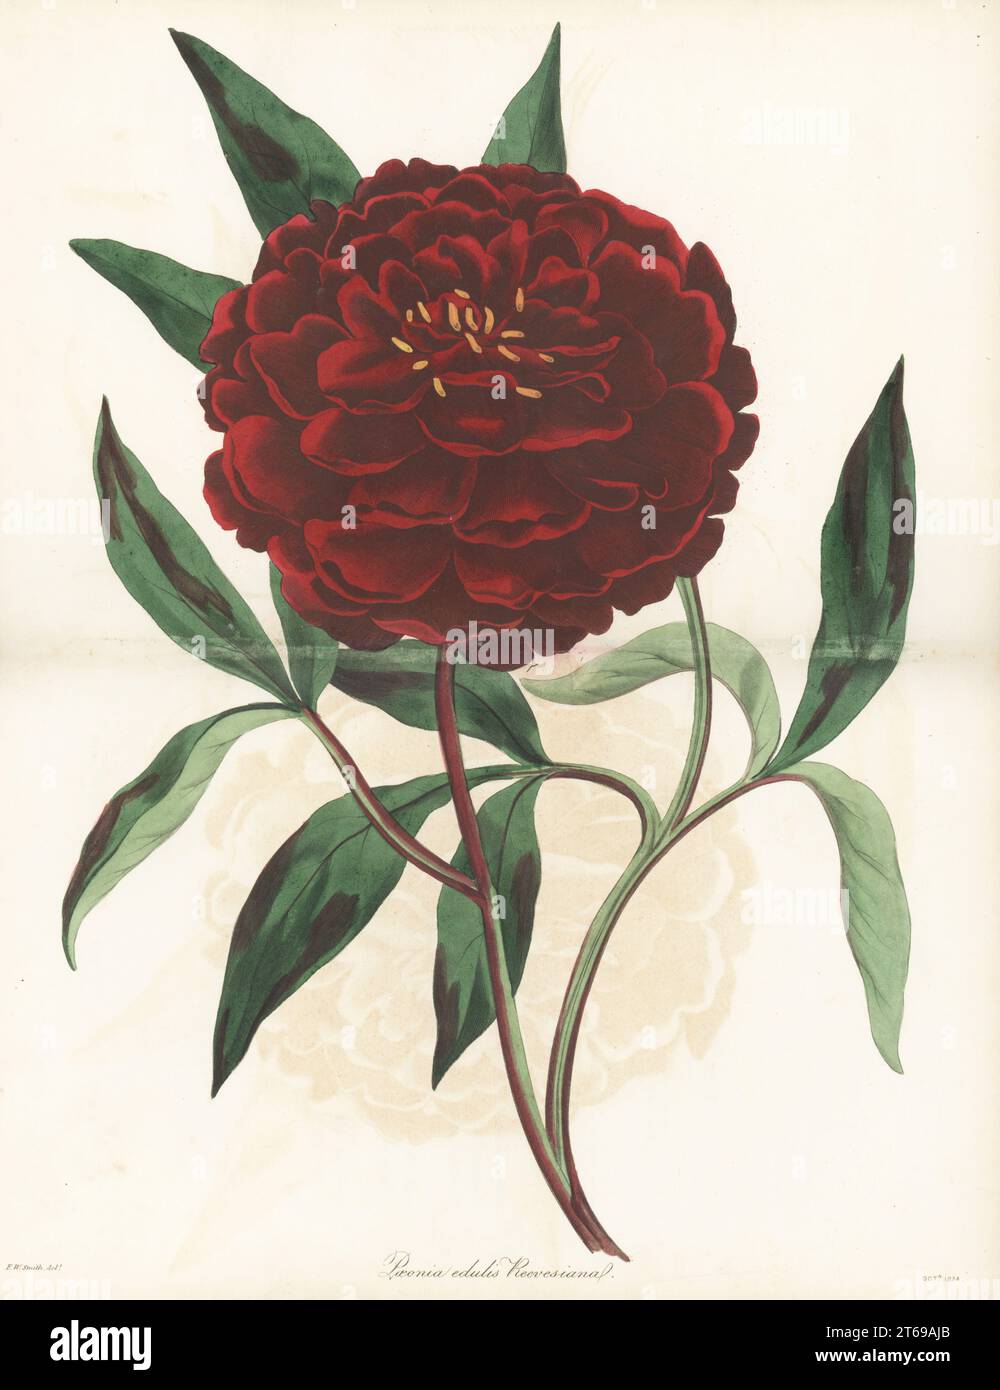 Chinese peony, Paeonia lactiflora. Native of China, introduced by English botanist John Reeves of the East India Company. Mr. Reeve's paeony, Paeonia edulis reevesiana. Handcoloured engraving after a botanical illustration by Frederick William Smith from Joseph Paxtons Magazine of Botany, and Register of Flowering Plants, Volume 1, Orr and Smith, London, 1834. Stock Photo